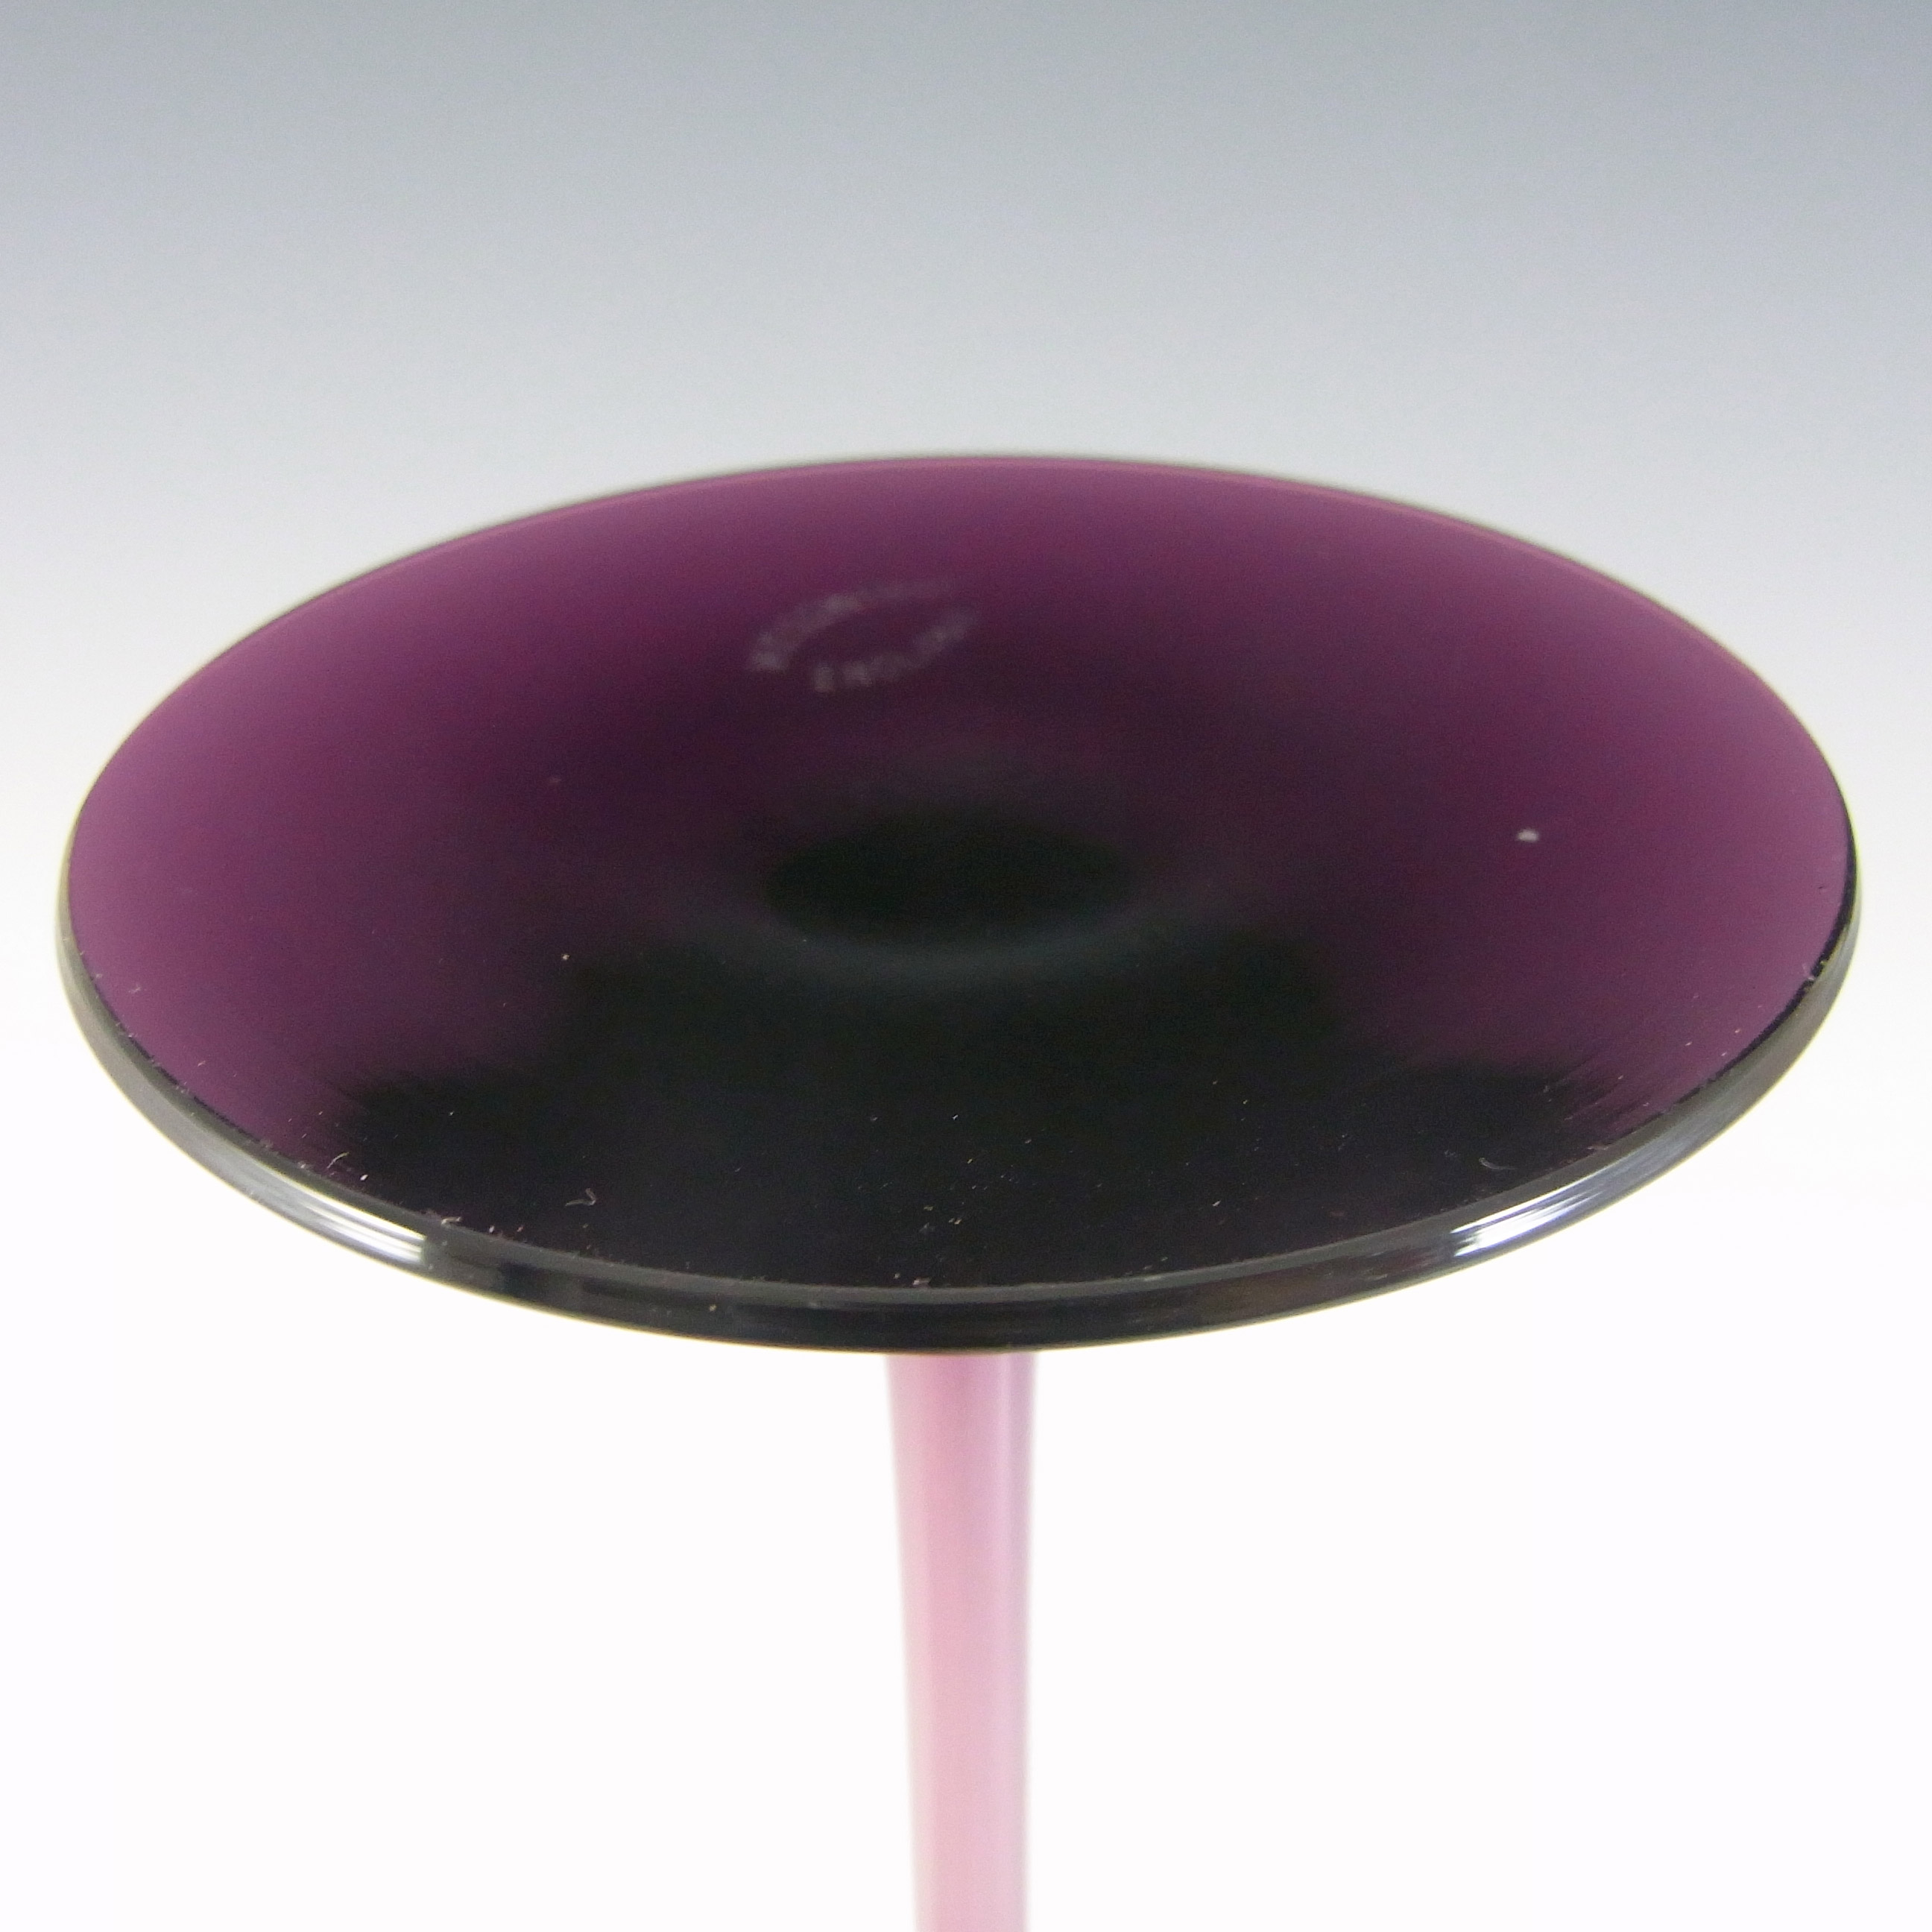 Wedgwood "Brancaster" Amethyst Glass 8" Candlestick RSW15/2 - Click Image to Close